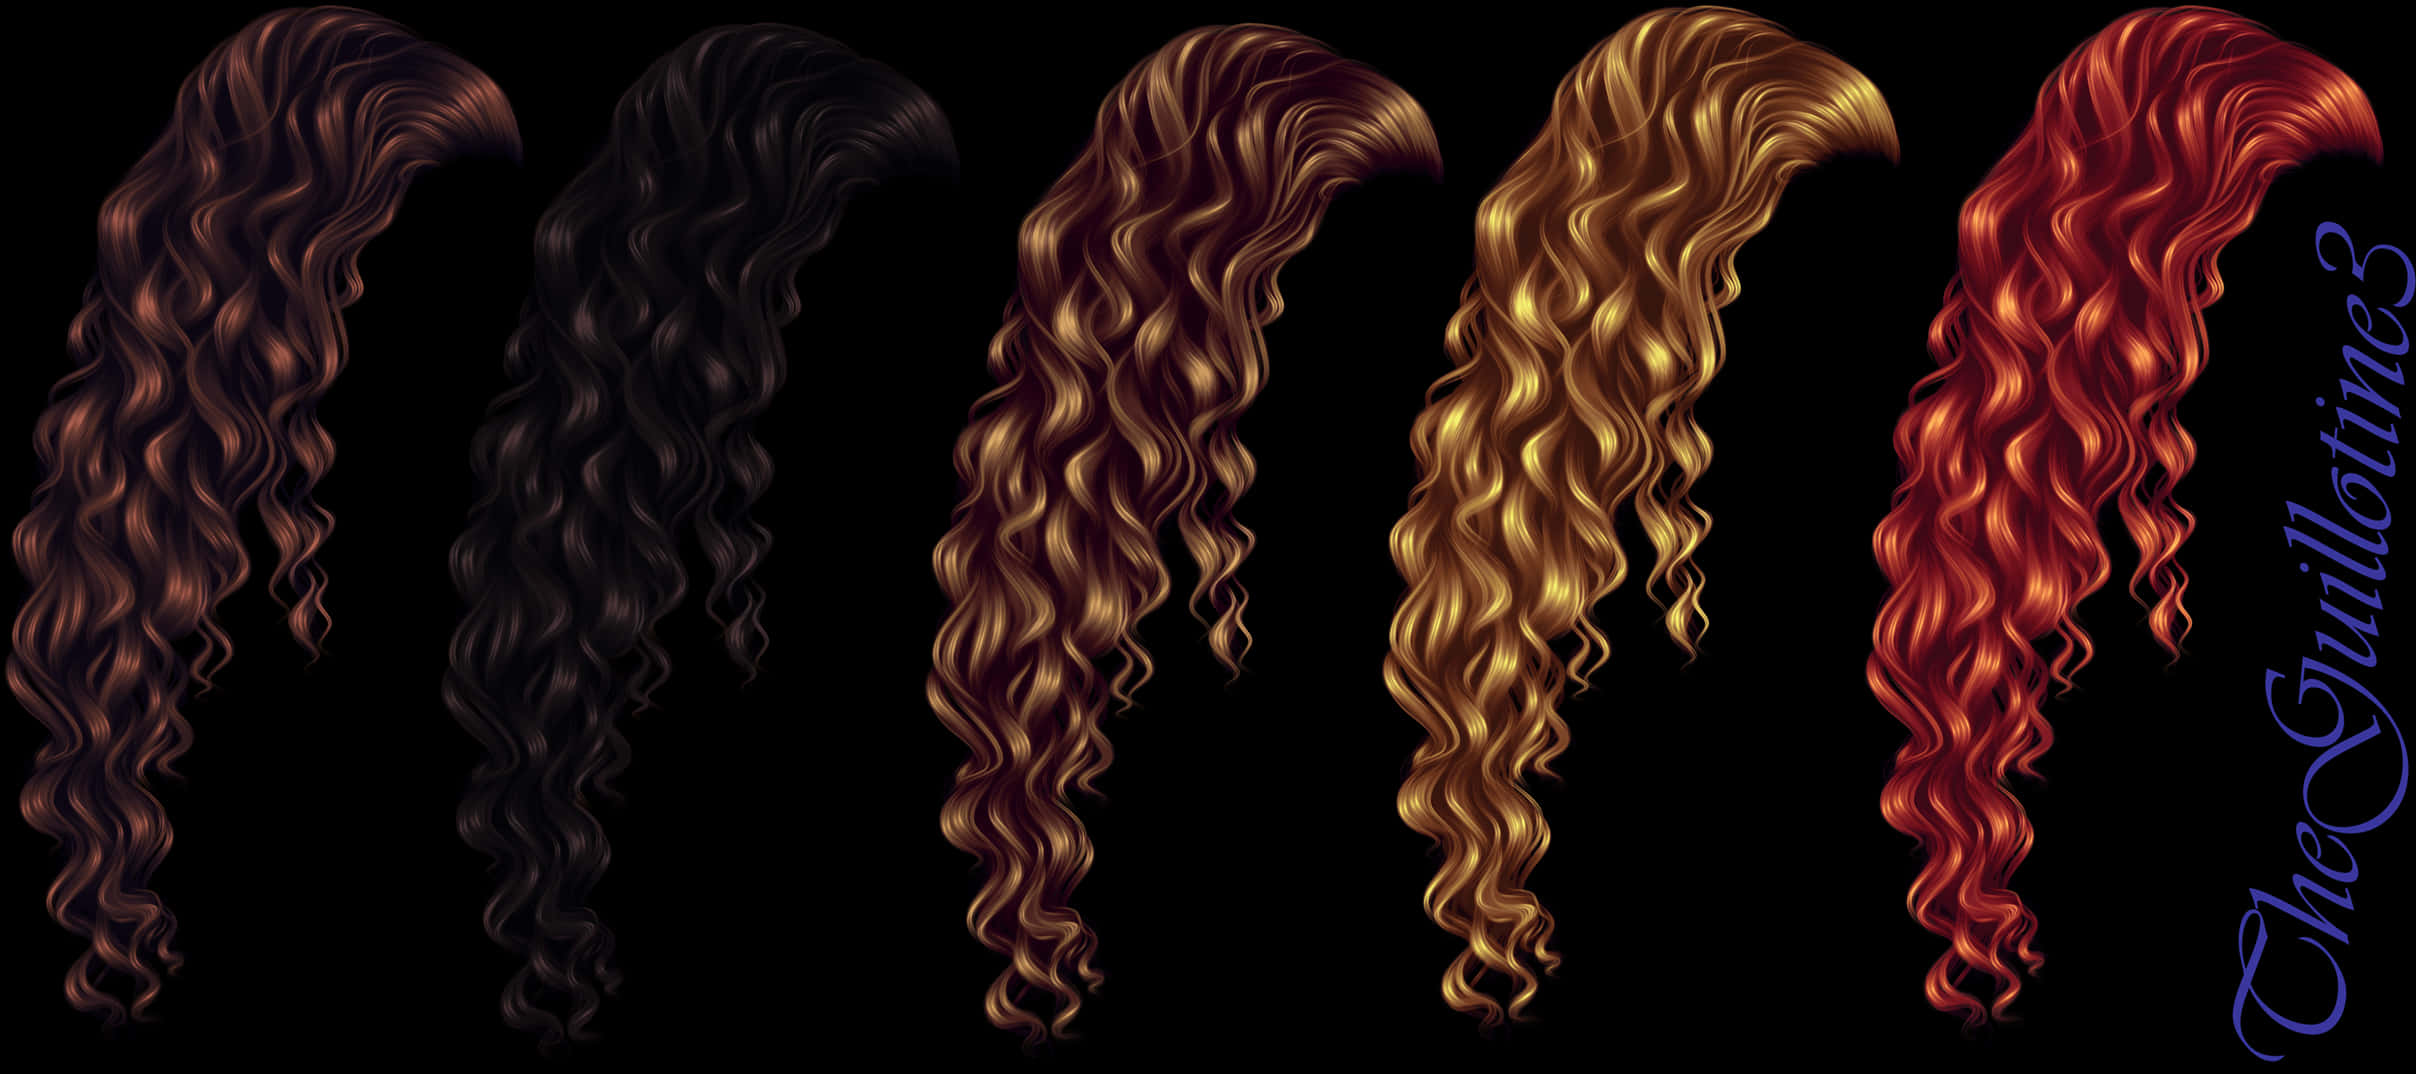 A Different Colored Hair Styles